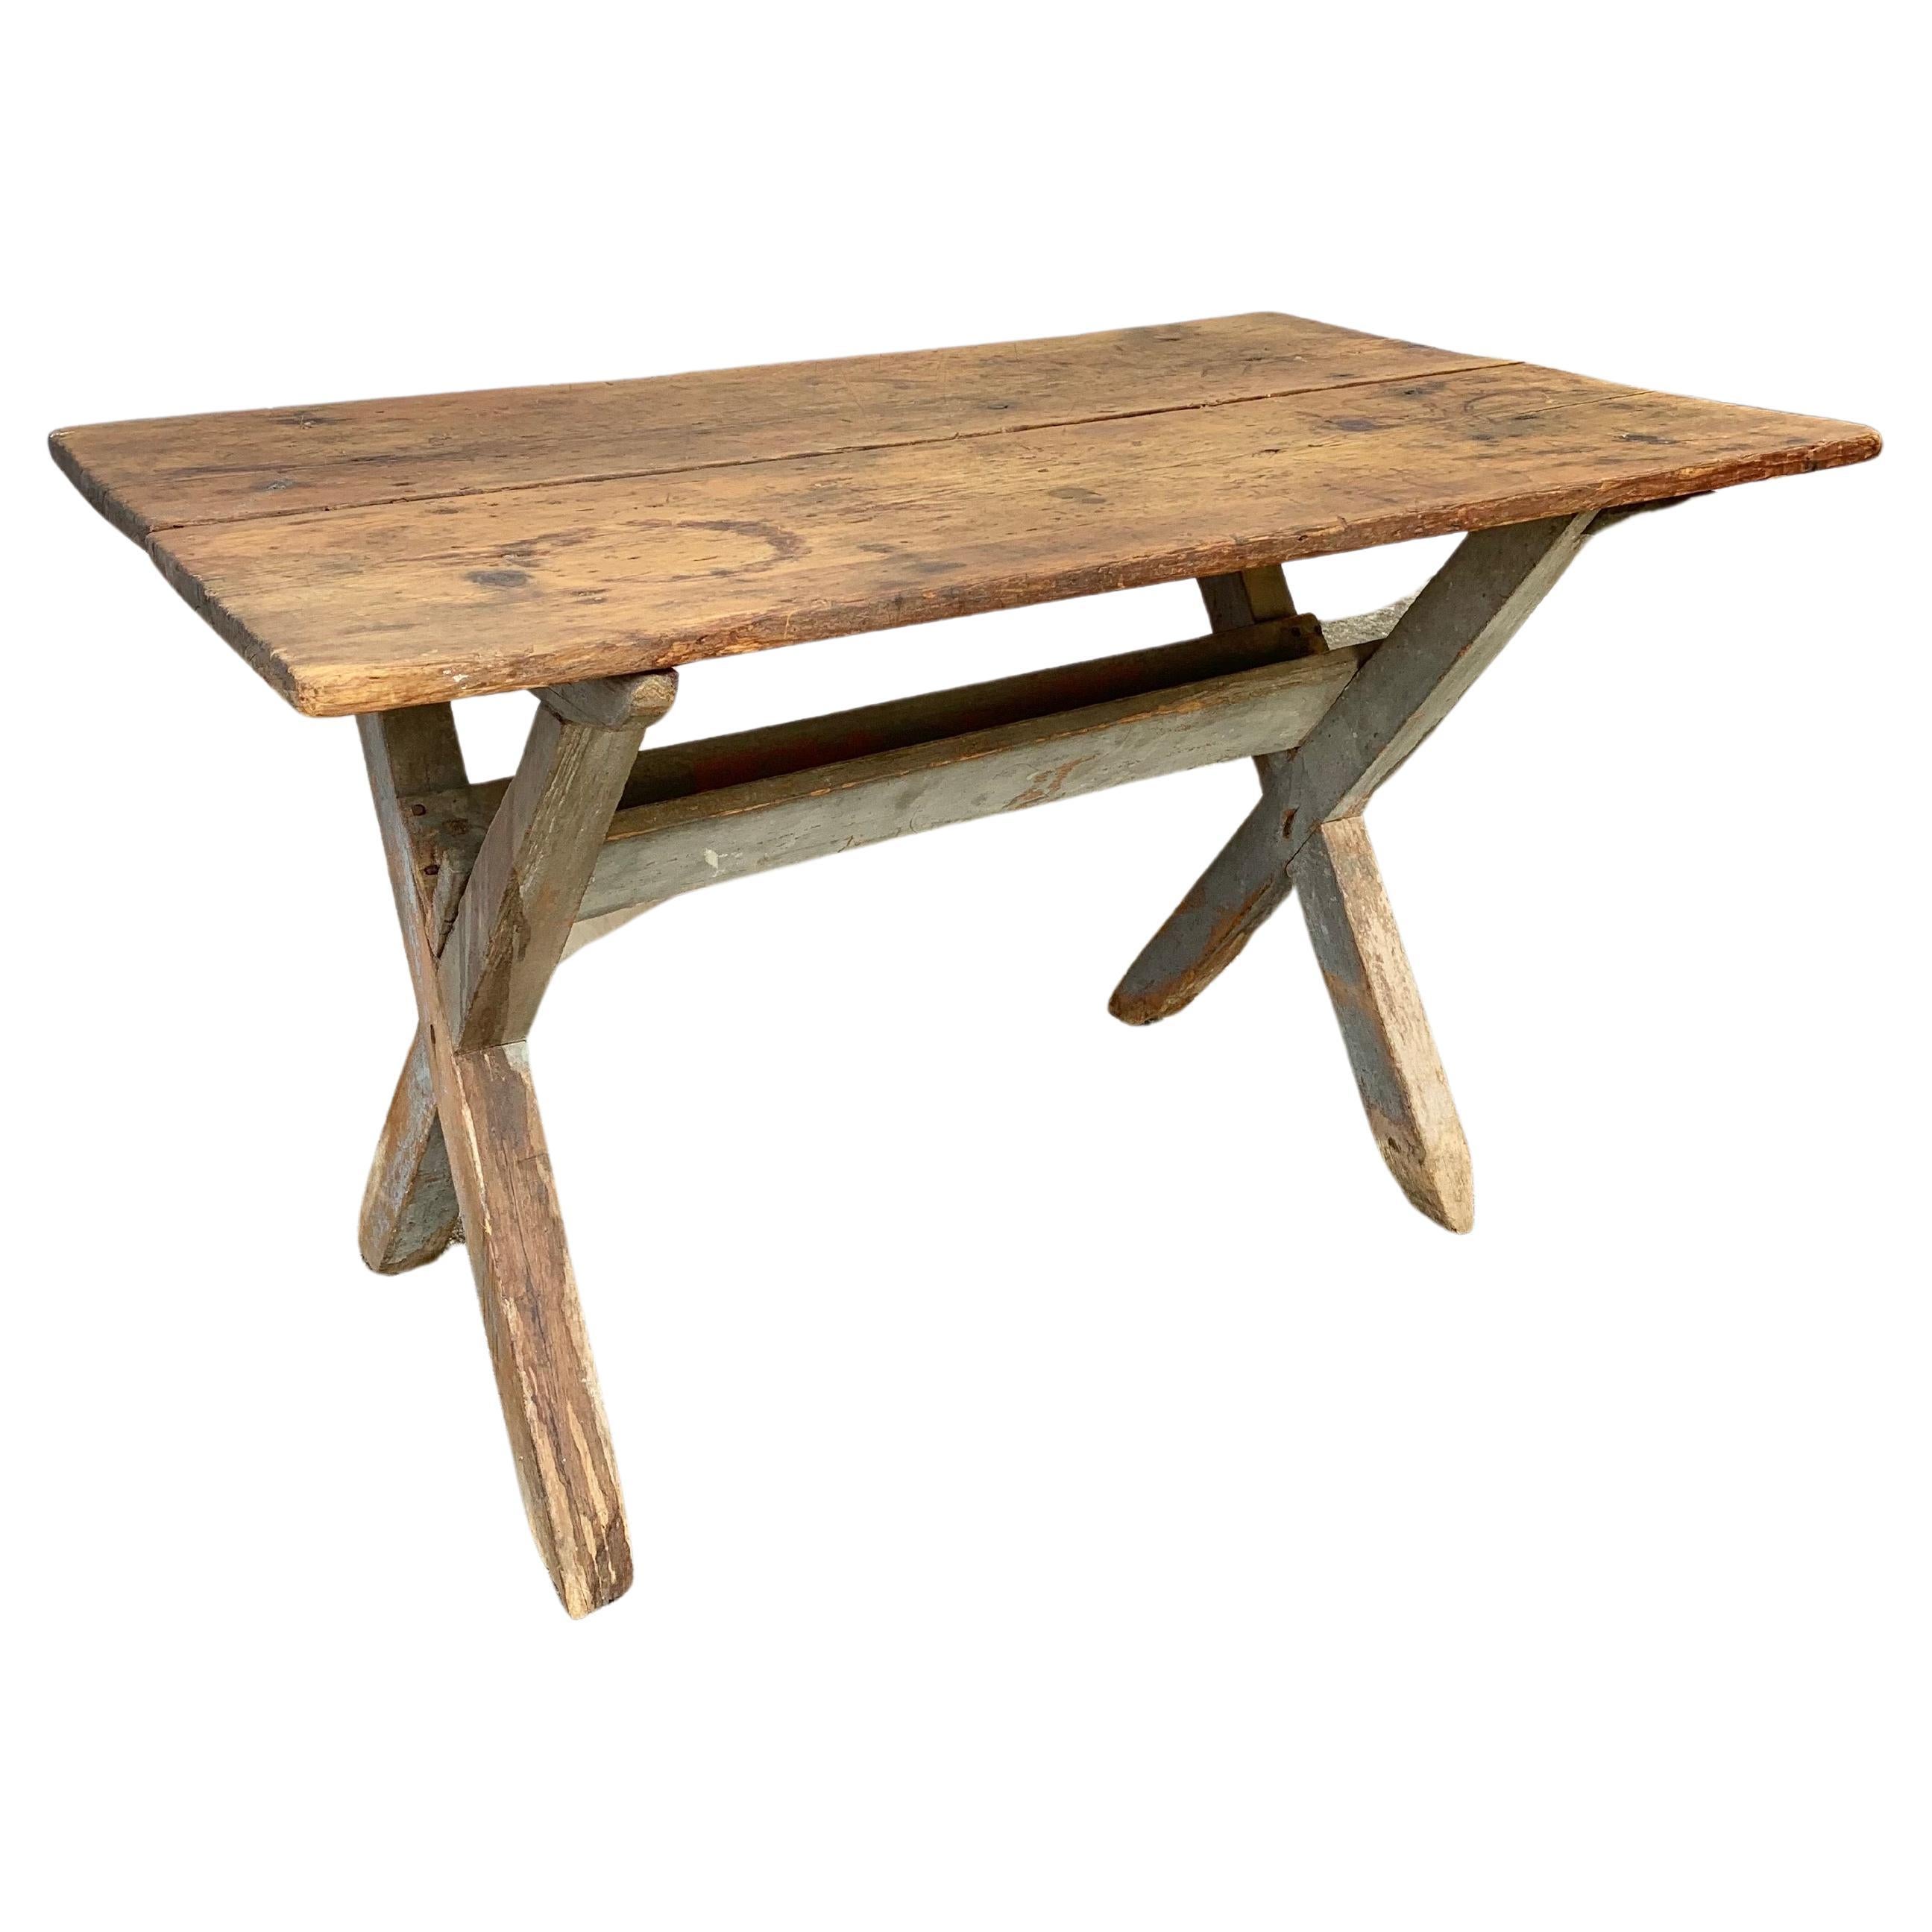 Early 20th Century English Pine Sawbuck Side Table For Sale